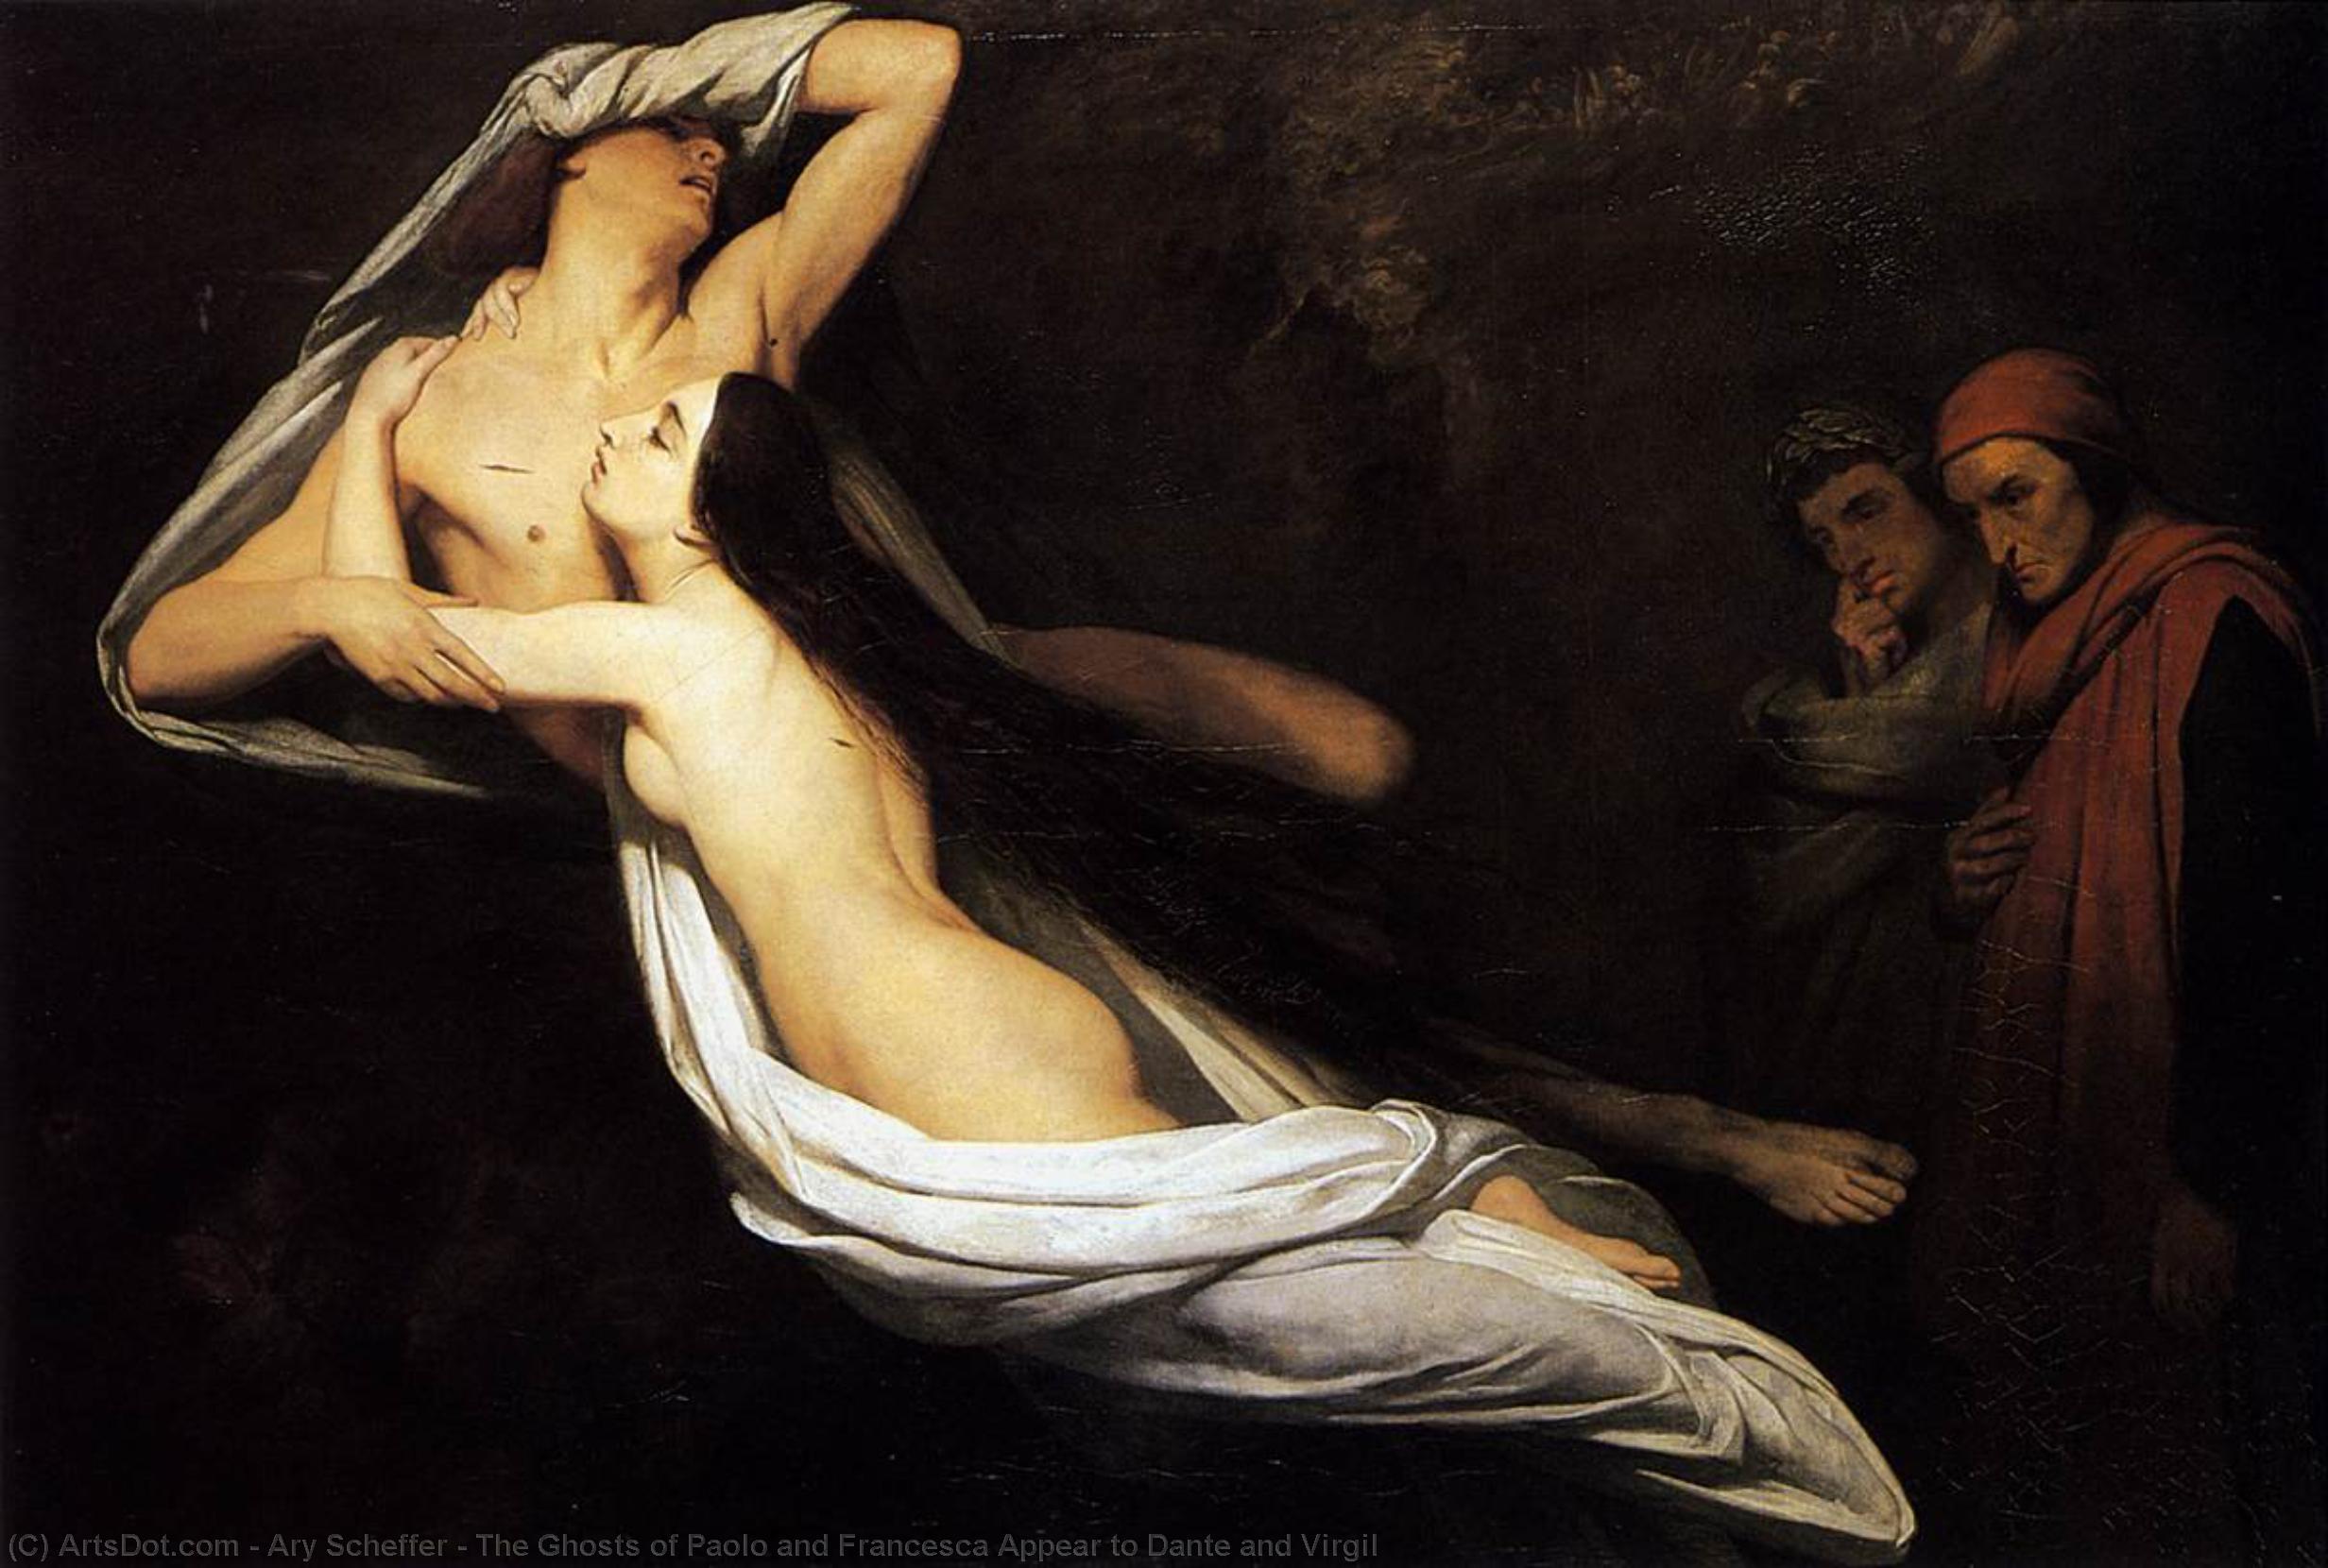 Buy Museum Art Reproductions The Ghosts of Paolo and Francesca Appear to Dante and Virgil, 1835 by Ary Scheffer (1795-1858, Netherlands) | ArtsDot.com